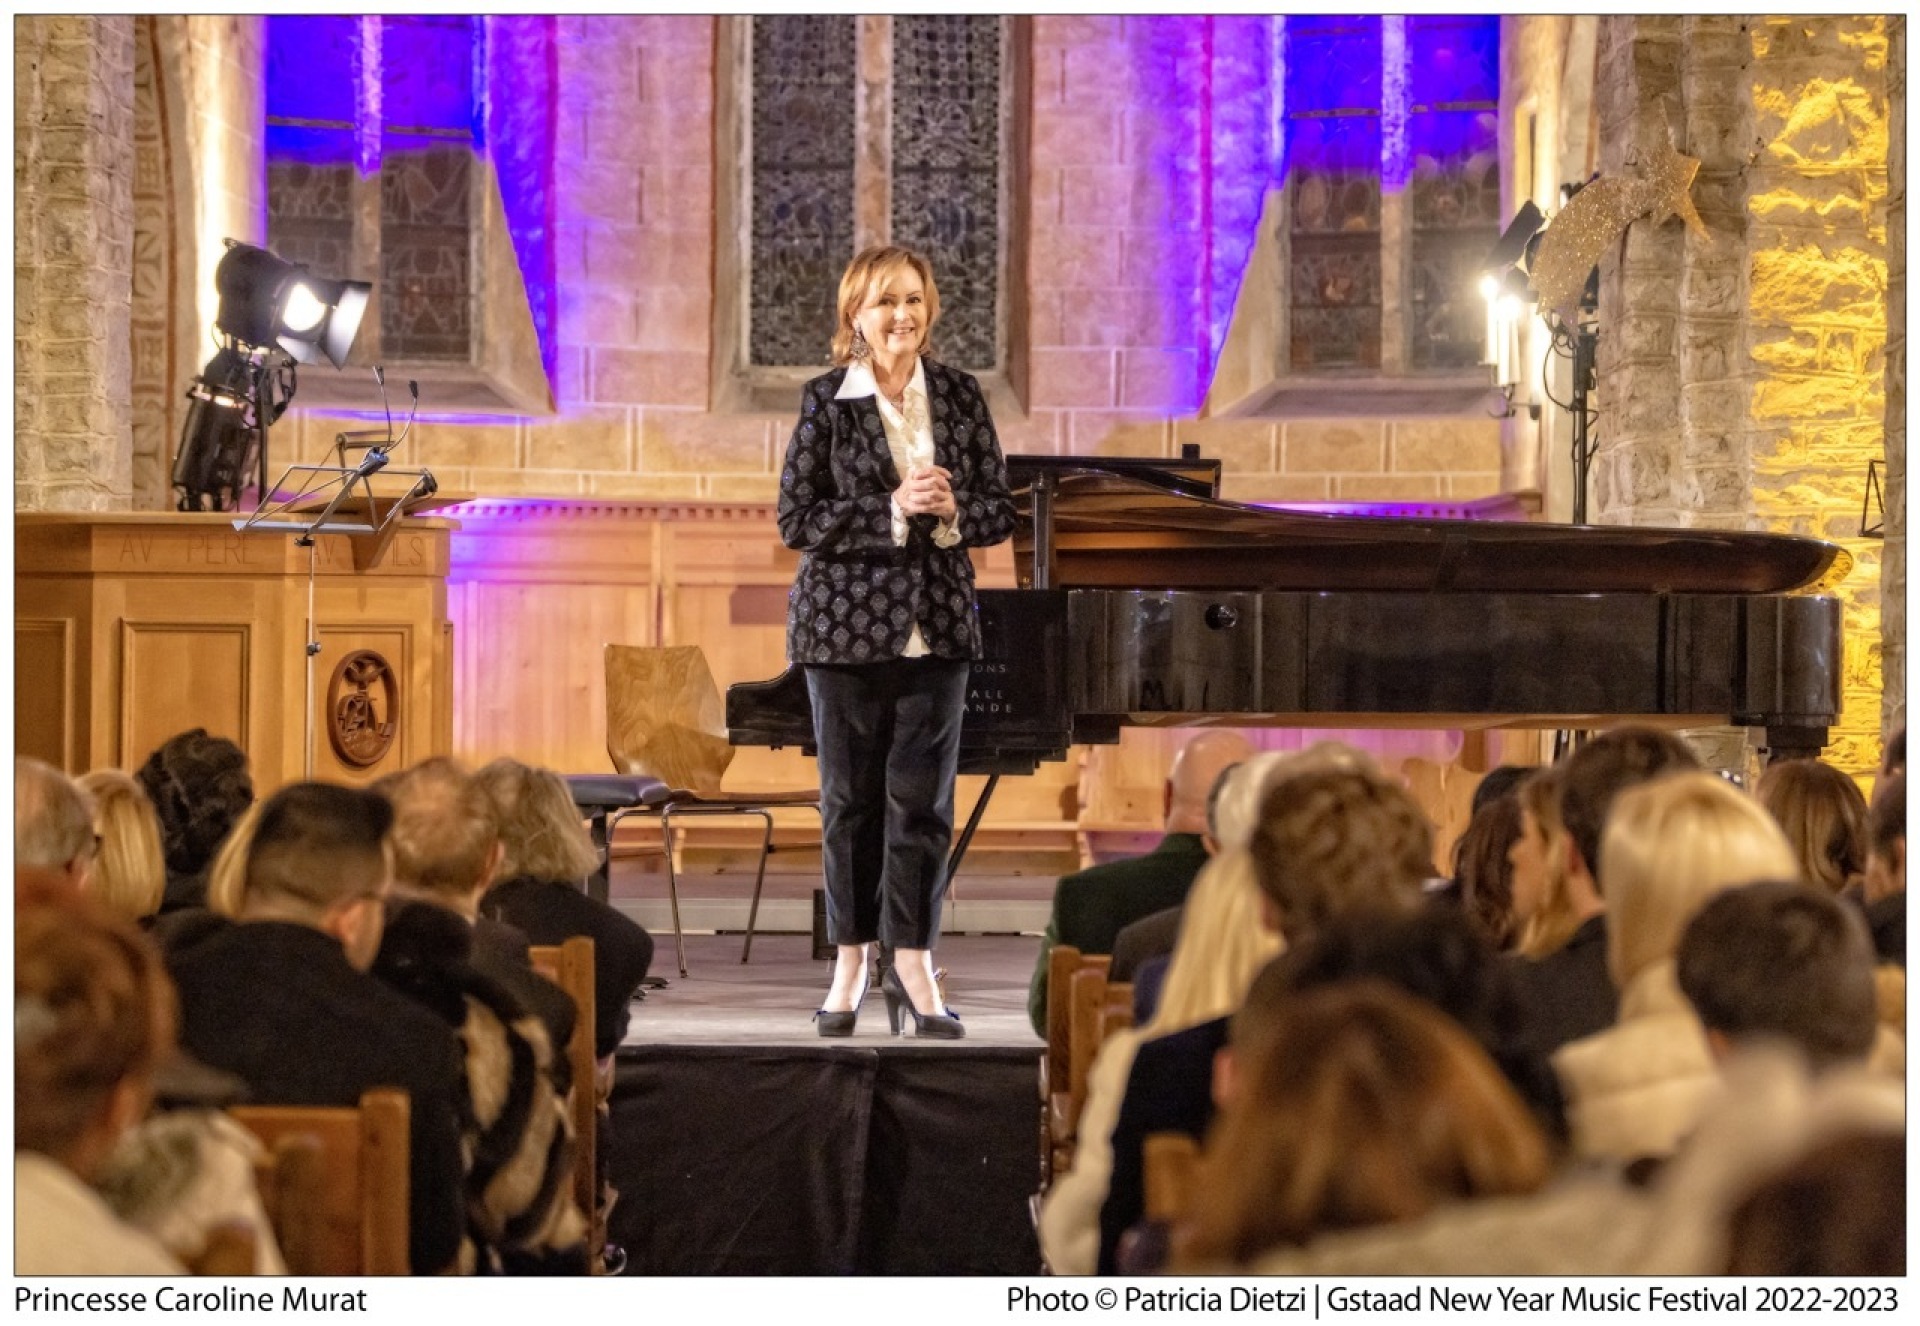 The artistic director, Princess Caroline Murat, was delighted to open the 17th edition of the Gstaad New Year Music Festival.